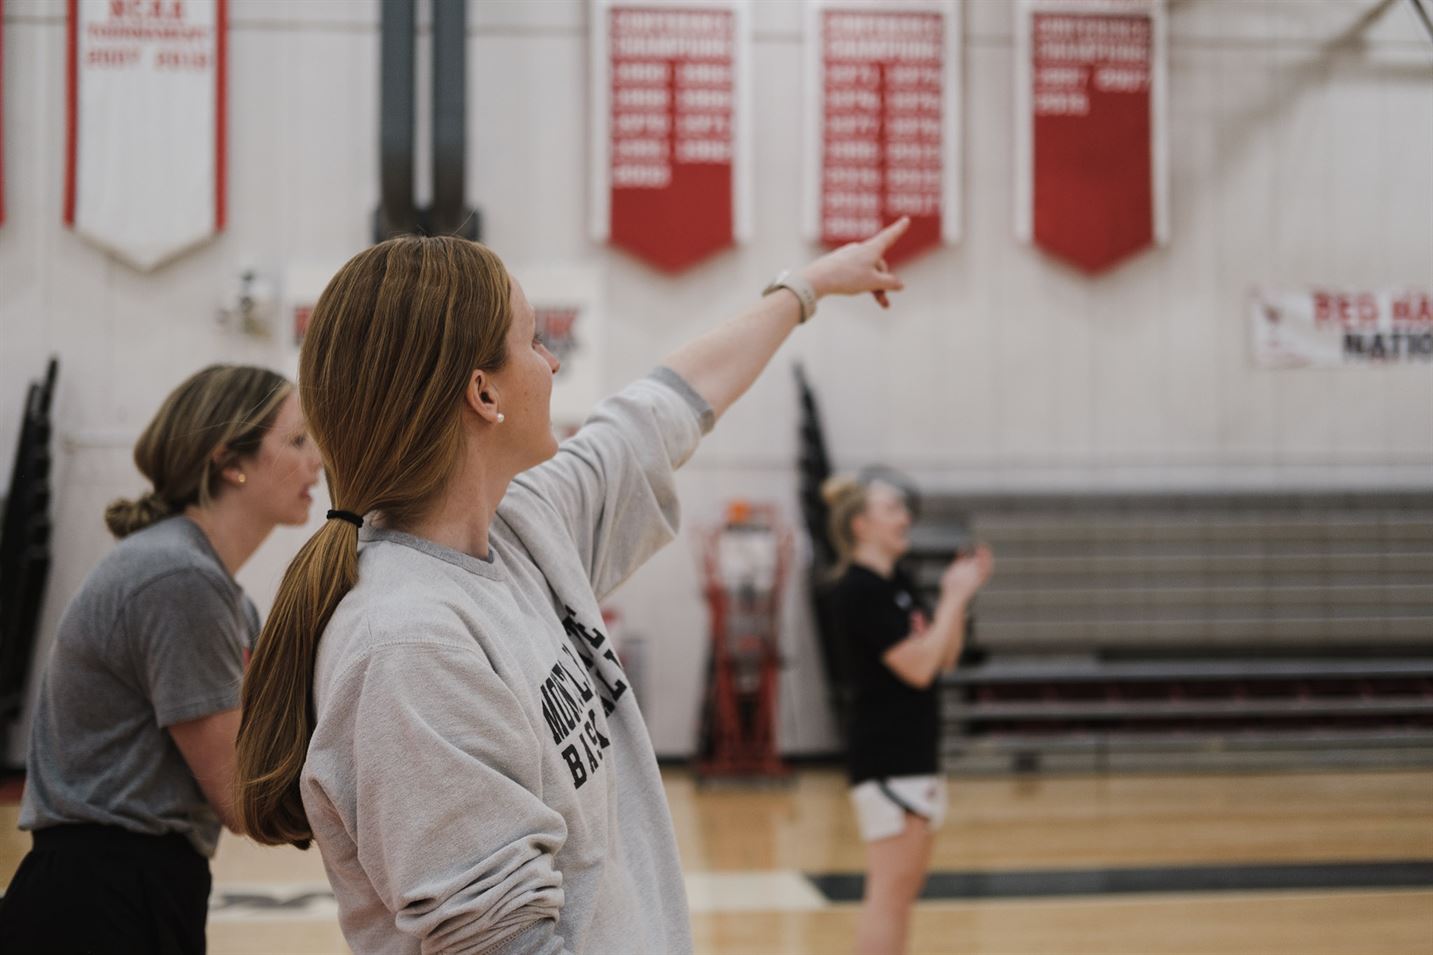 15 years into coaching with the Red Hawks, Cunningham has become a staple with the women's basketball program. Michael Callejas | The Montclarion